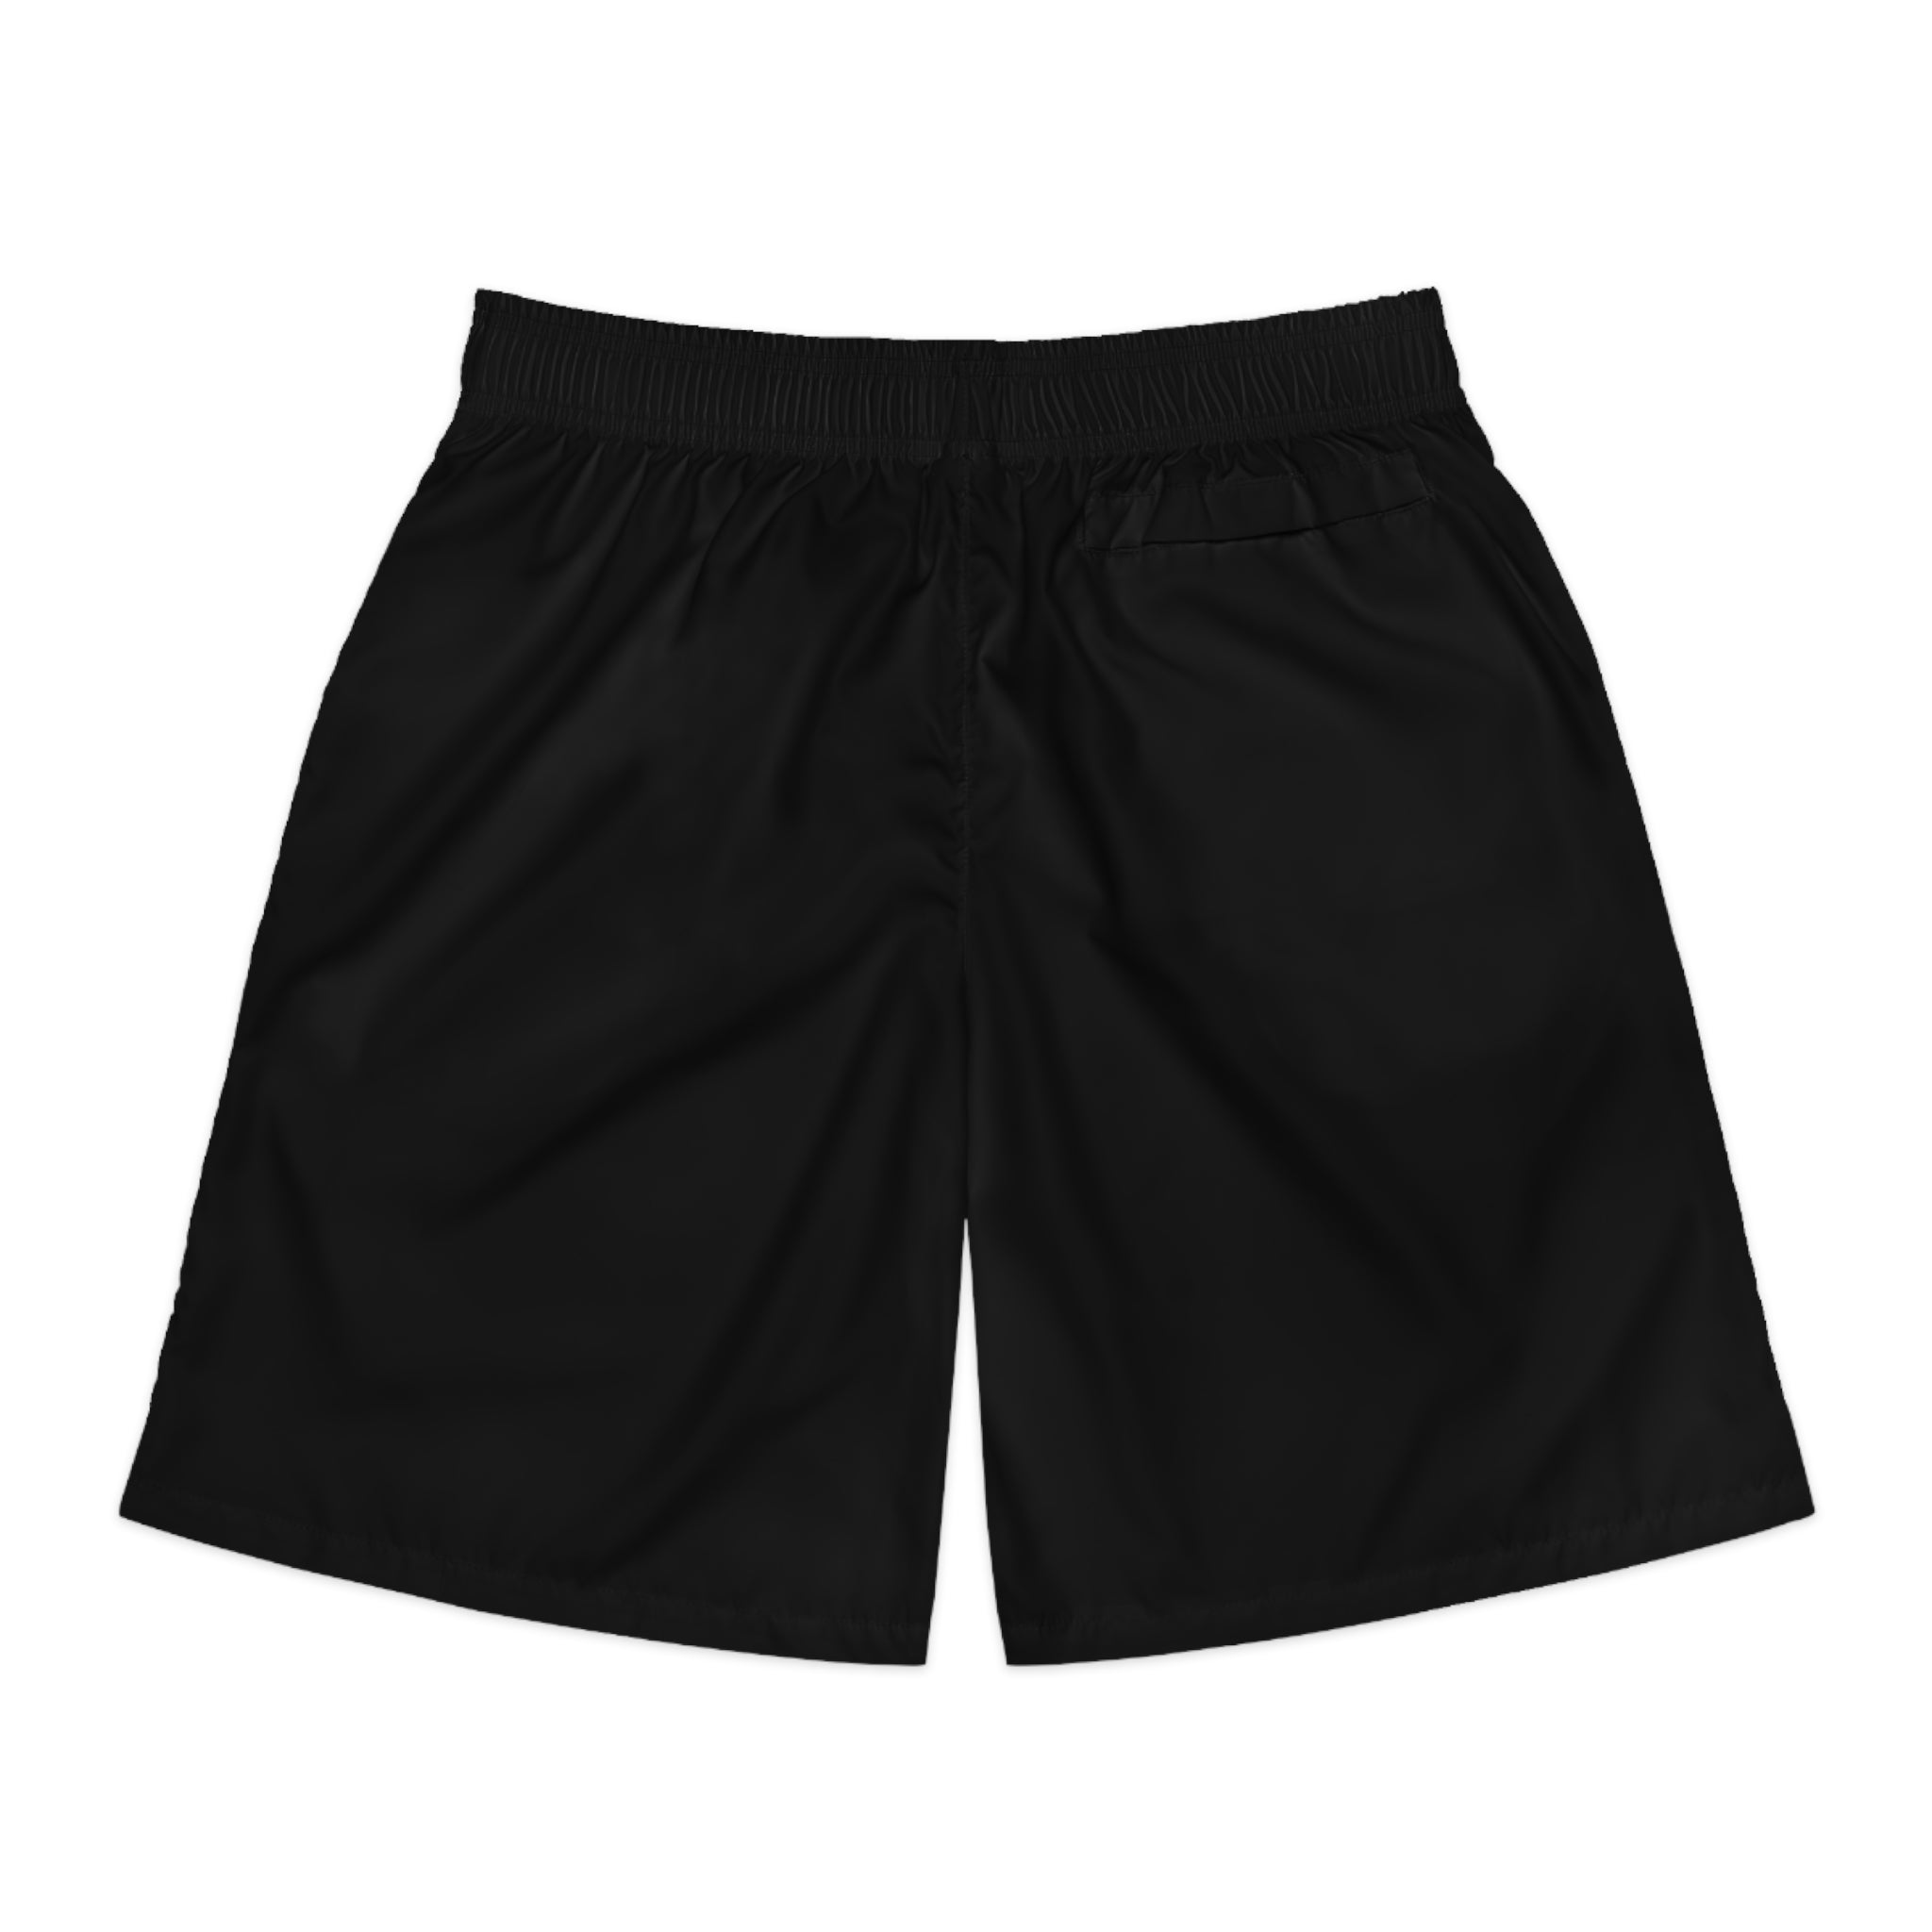 Red XStyle  Men's Jogger Shorts (AOP)